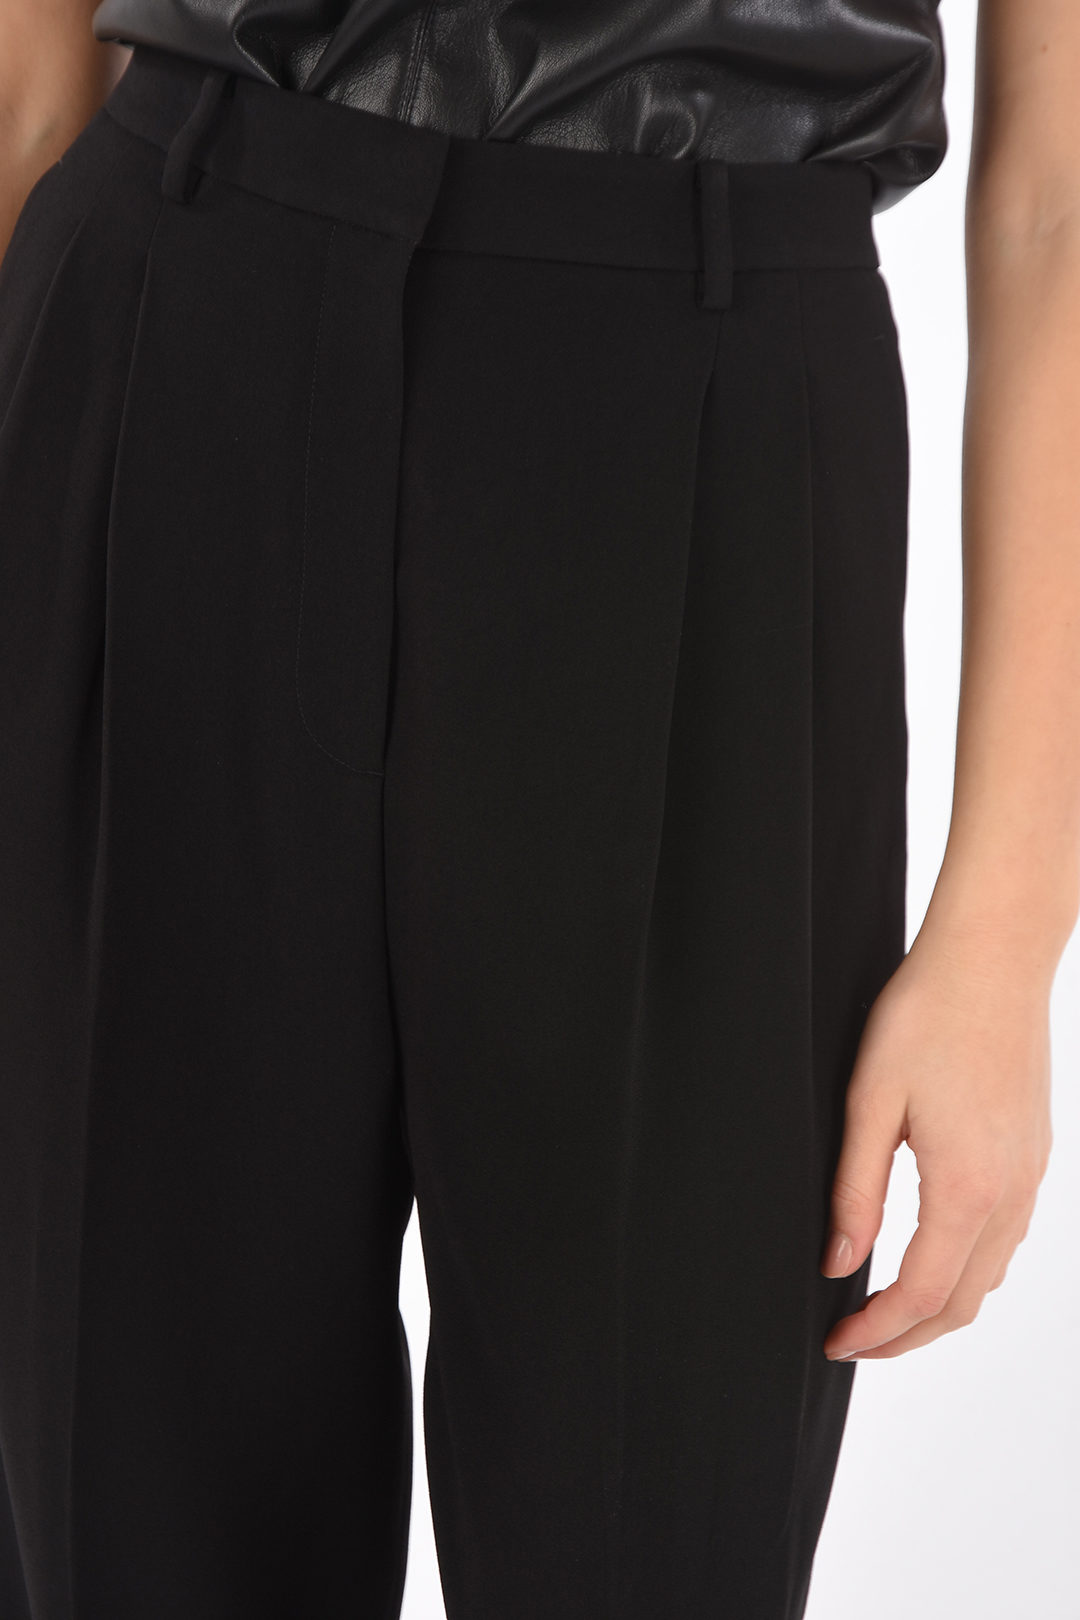 Tory Burch High-rise Crepe Trousers with Double pleat women - Glamood Outlet